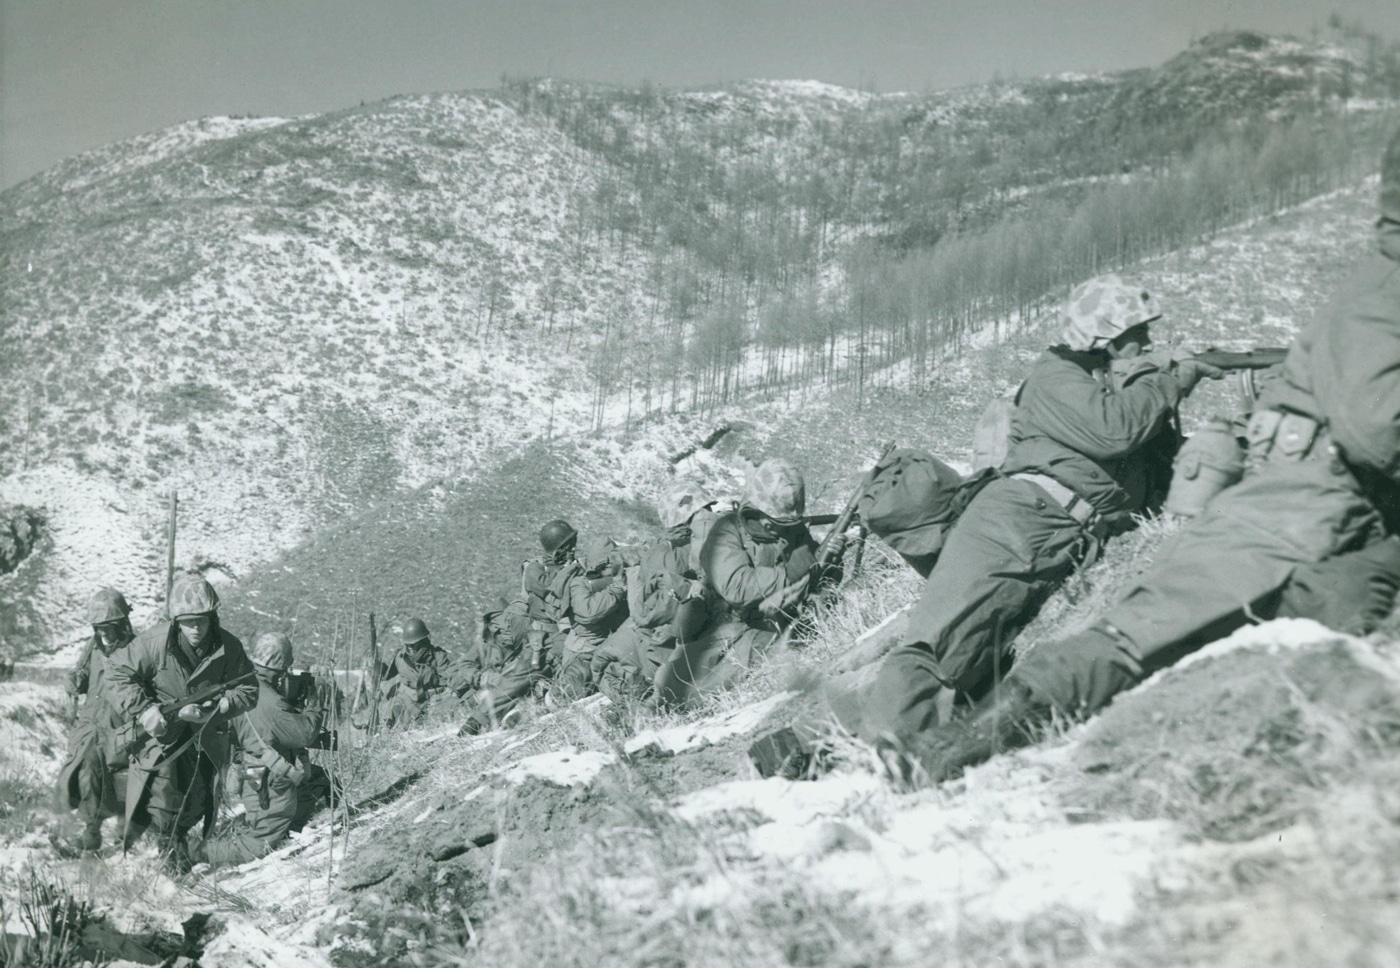 Marines clear a ridge during the Battle of the Chosin Reservoir